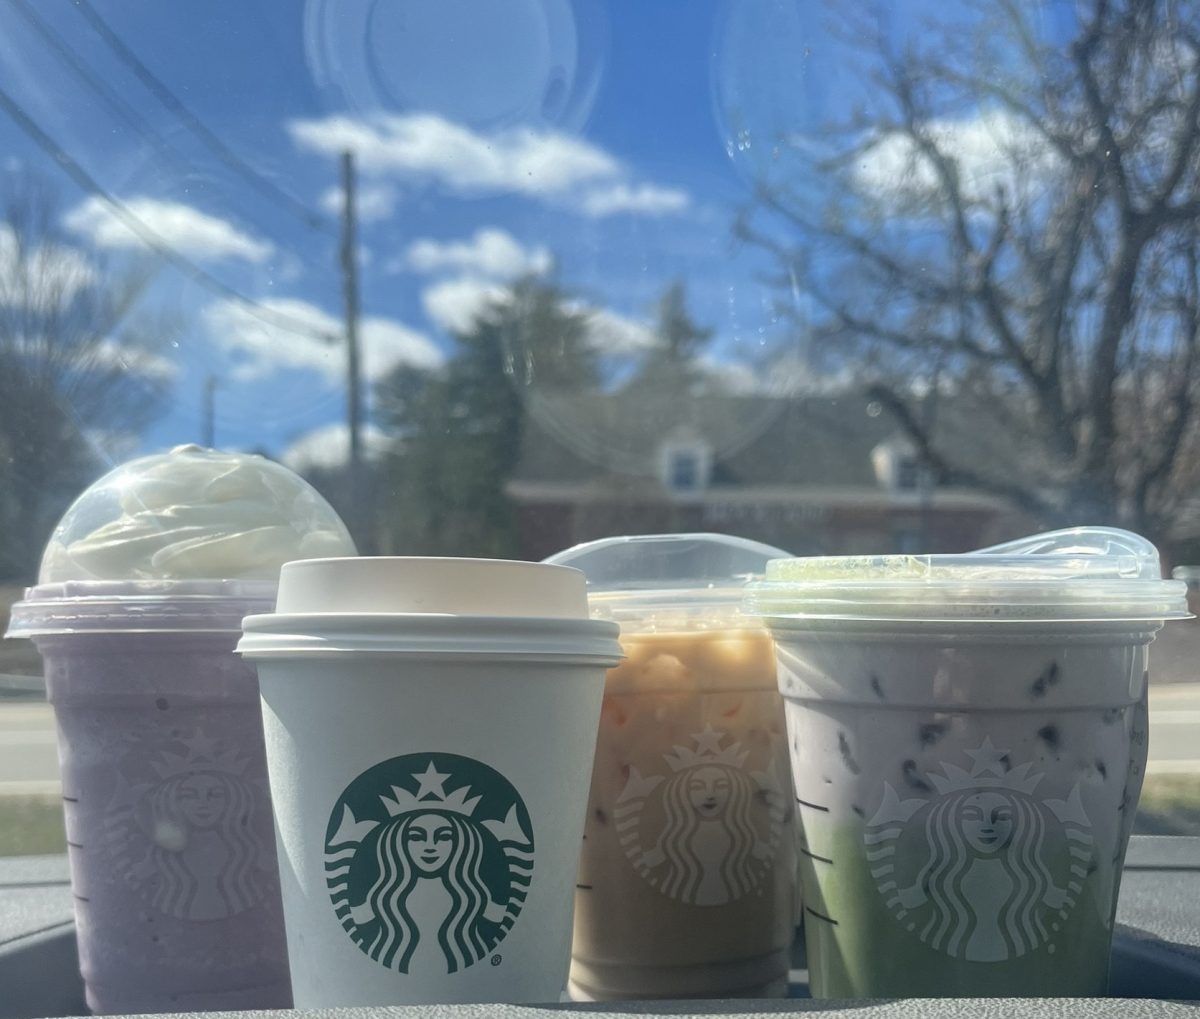 For a spring pick-me-up, try the four lavender options at Starbucks